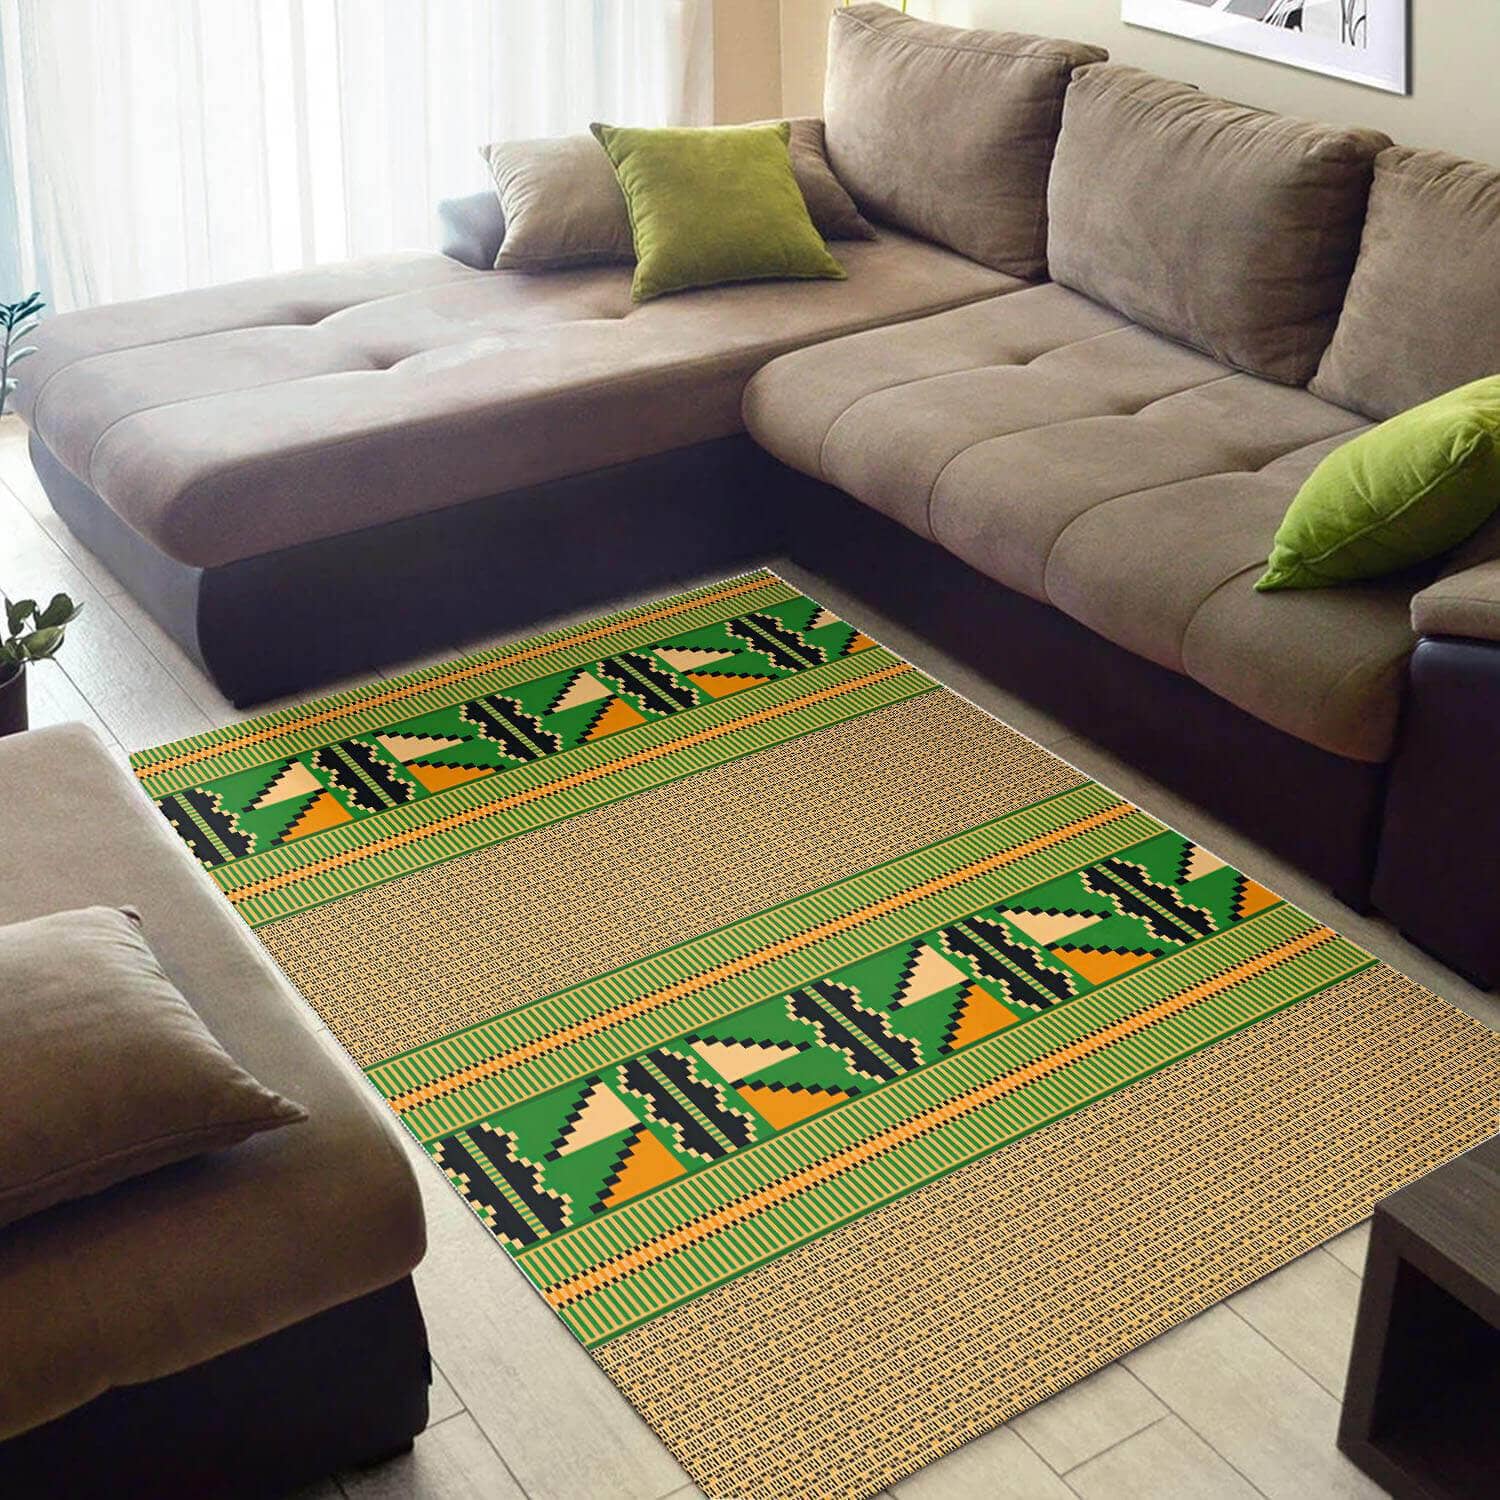 Beautiful African American Perfect Afro Seamless Pattern Style Carpet Rug